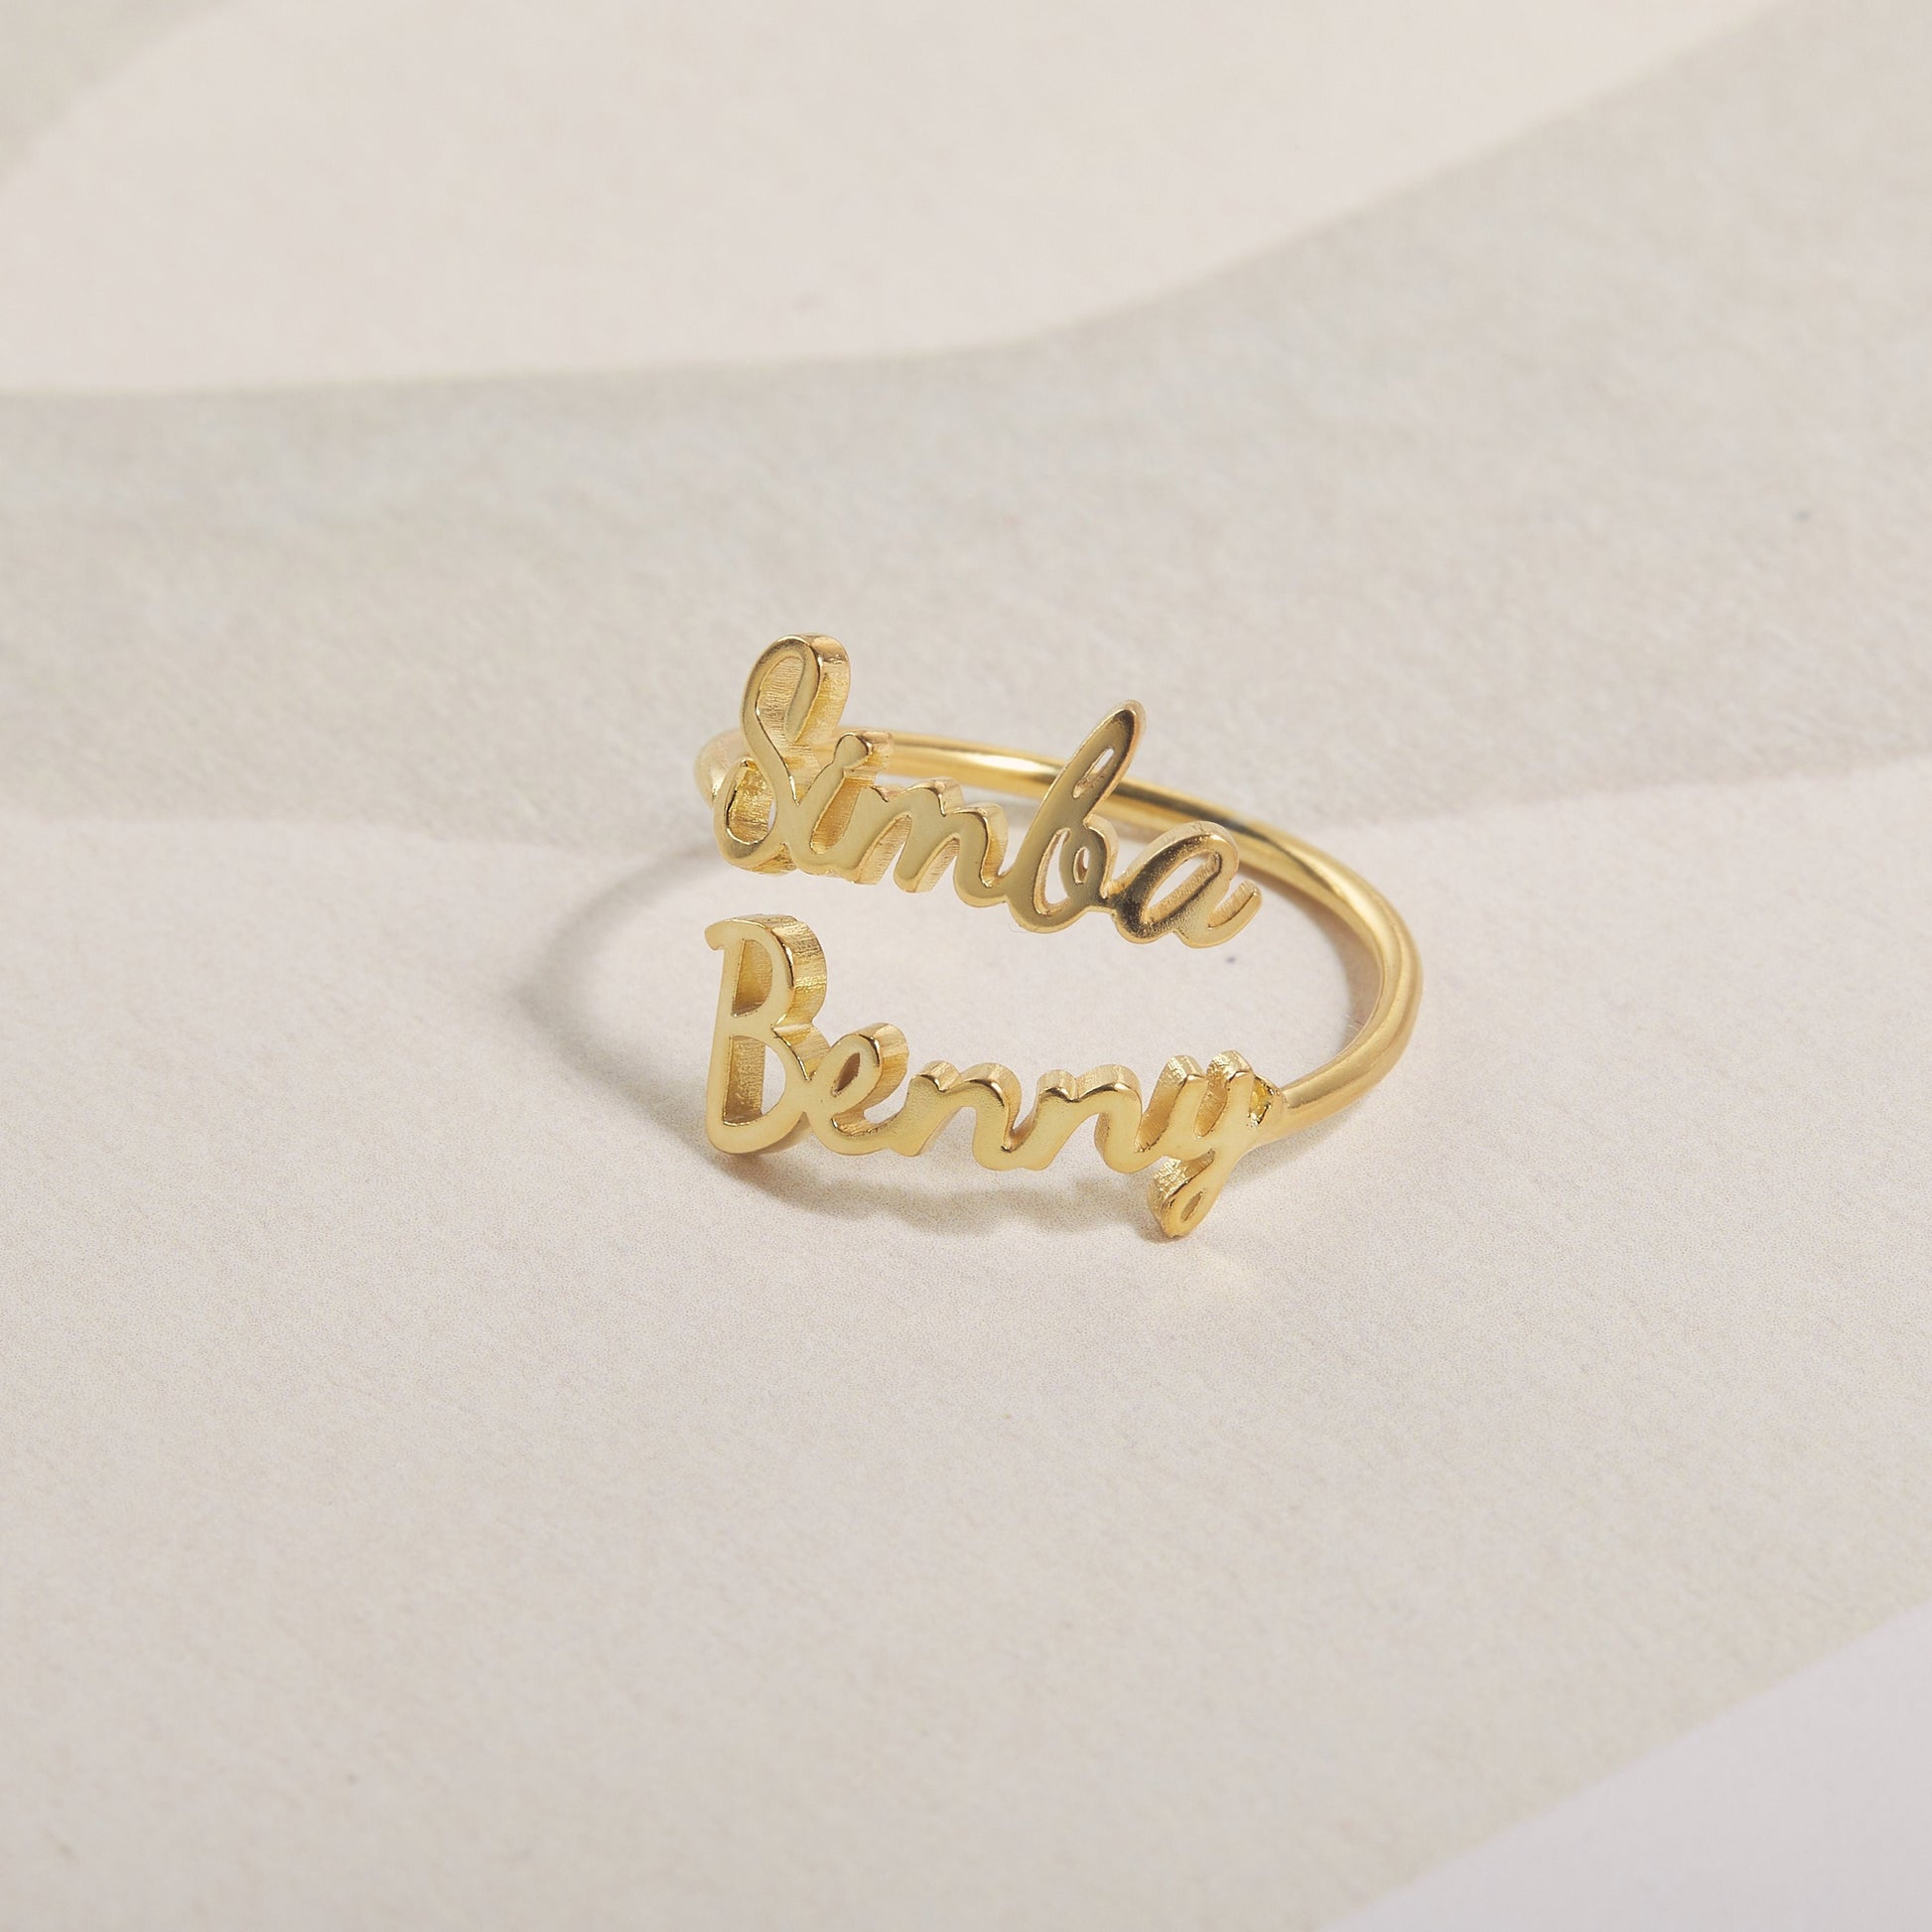 Personalized Children Name Ring | Family Name Ring | Dainty  Ring Jewelry | Stacking Name Ring | Personalized Stackable Ring | Gift for Mom